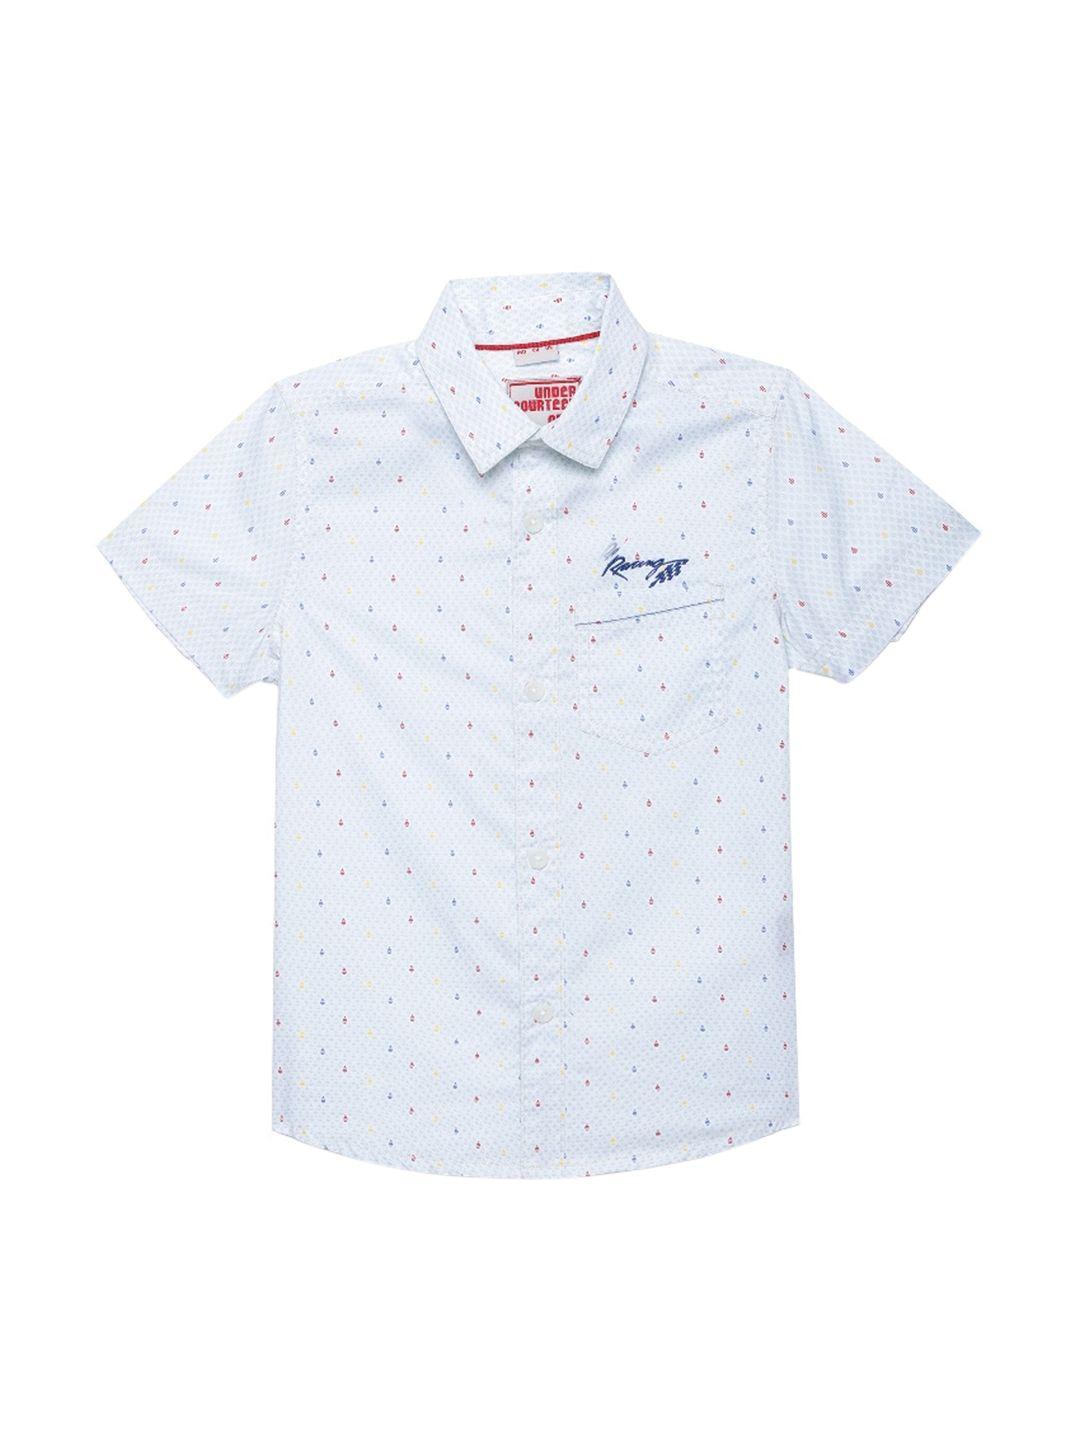 under-fourteen-only-boys-cream-coloured-regular-fit-printed-casual-shirt